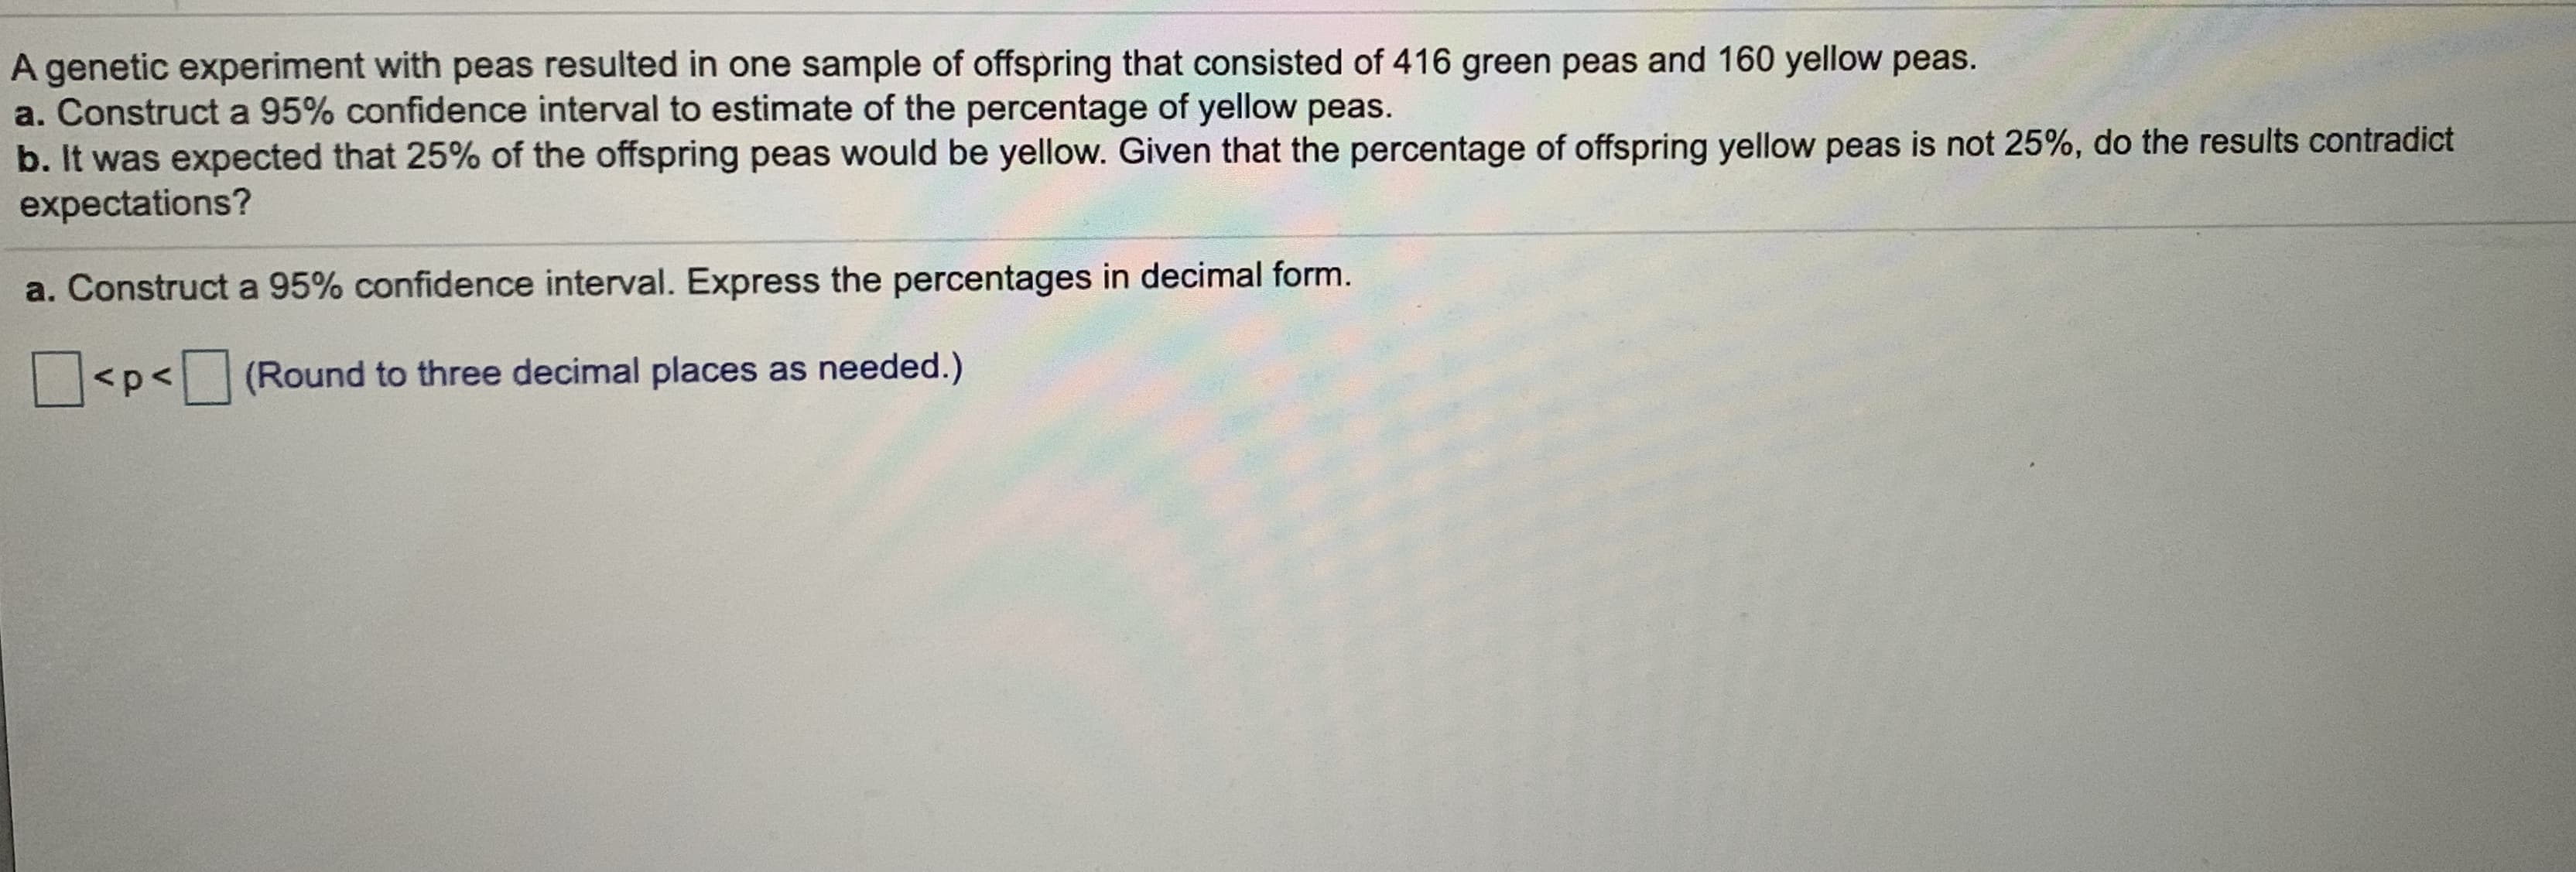 A genetic experiment with peas resulted in one sample of offspring that consisted of 416 green peas and 160 yellow peas.
a. Construct a 95% confidence interval to estimate of the percentage of yellow peas.
b. It was expected that 25% of the offspring peas would be yellow. Given that the percentage of offspring yellow peas is not 25%, do the results contradict
expectations?
rOontogos in decimal form
